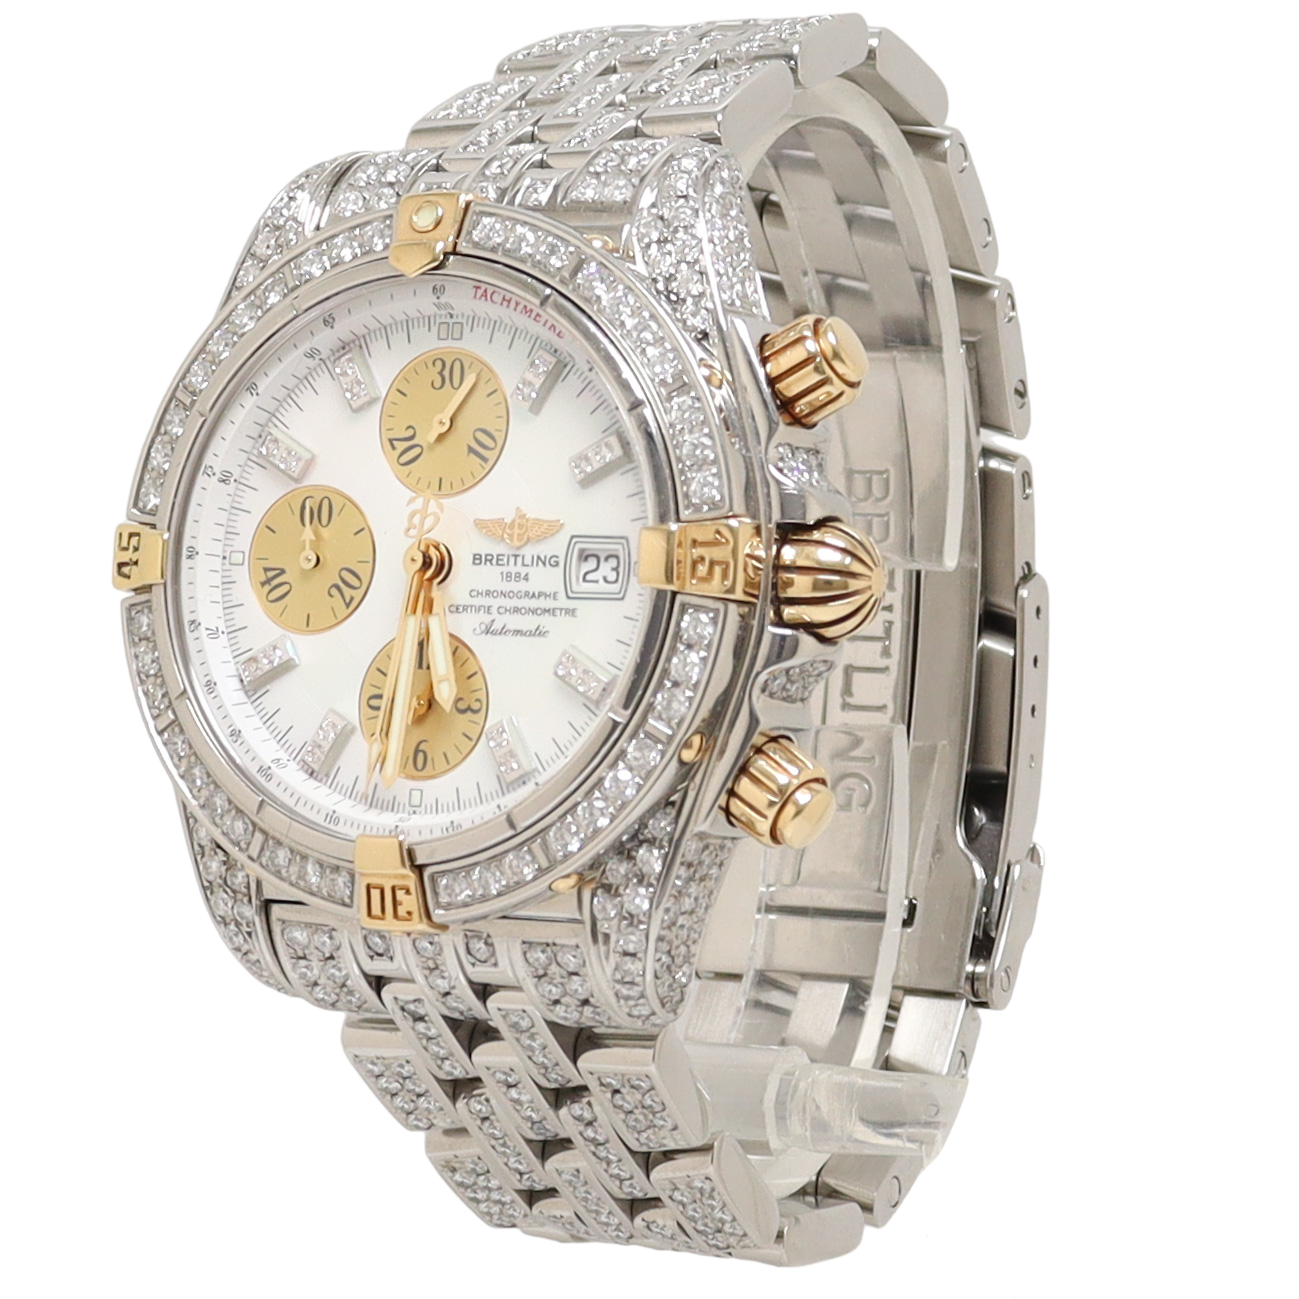 Load image into Gallery viewer, Breitling Evolution Chronomat Diamond Watch with Mother of Pearl Diamond Dial Watch Reference#: B13356 - Happy Jewelers Fine Jewelry Lifetime Warranty
